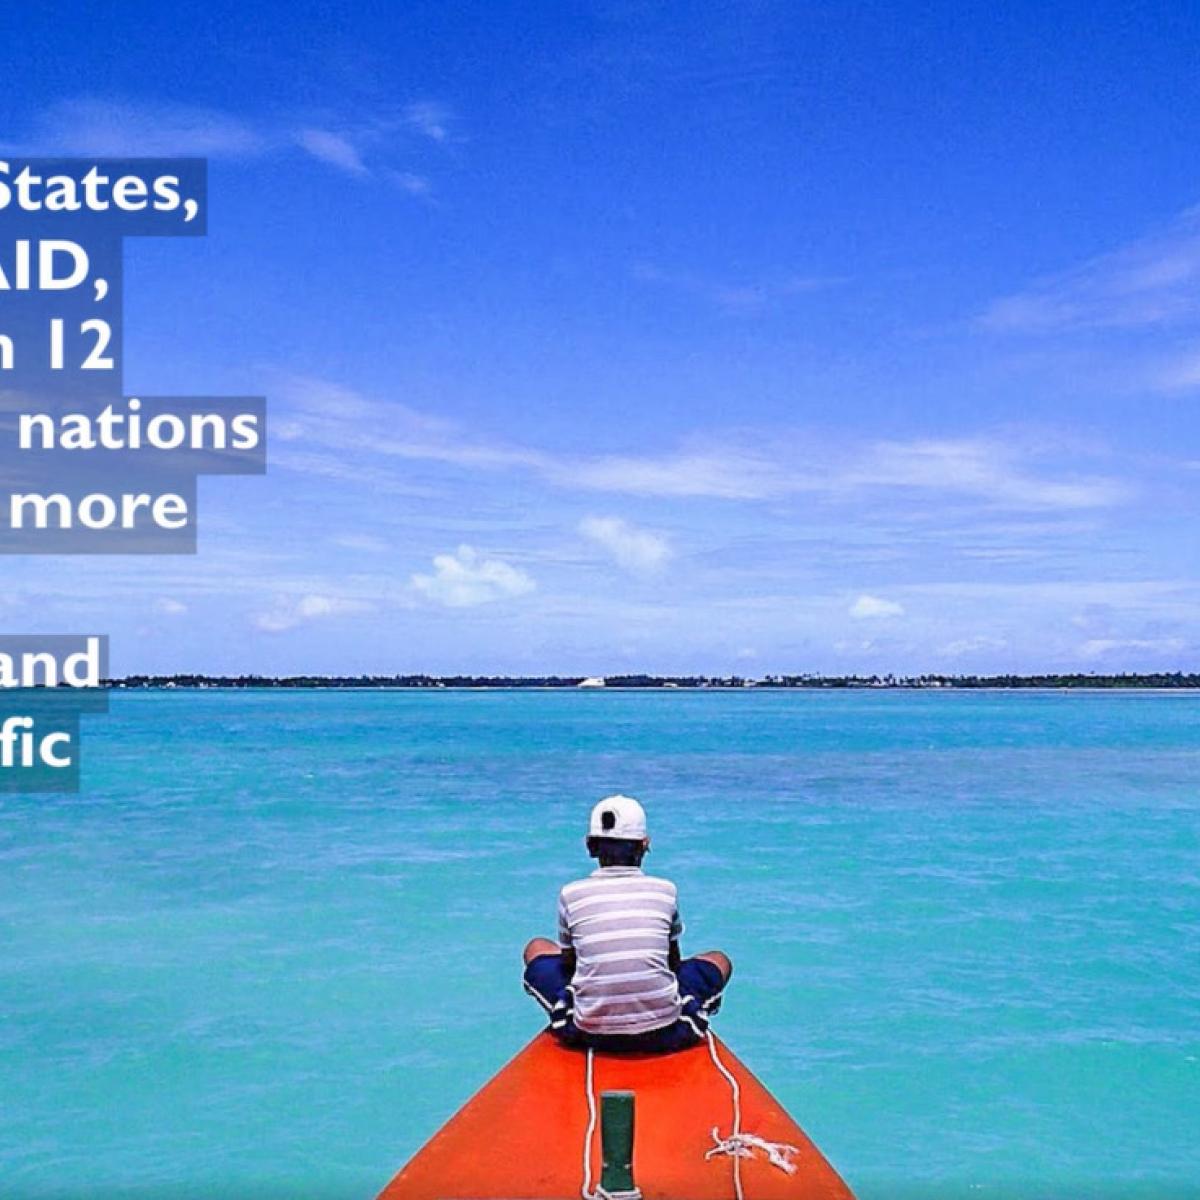 USAID partners with 12 Pacific Island nations for a more prosperous and resilient Pacific region.